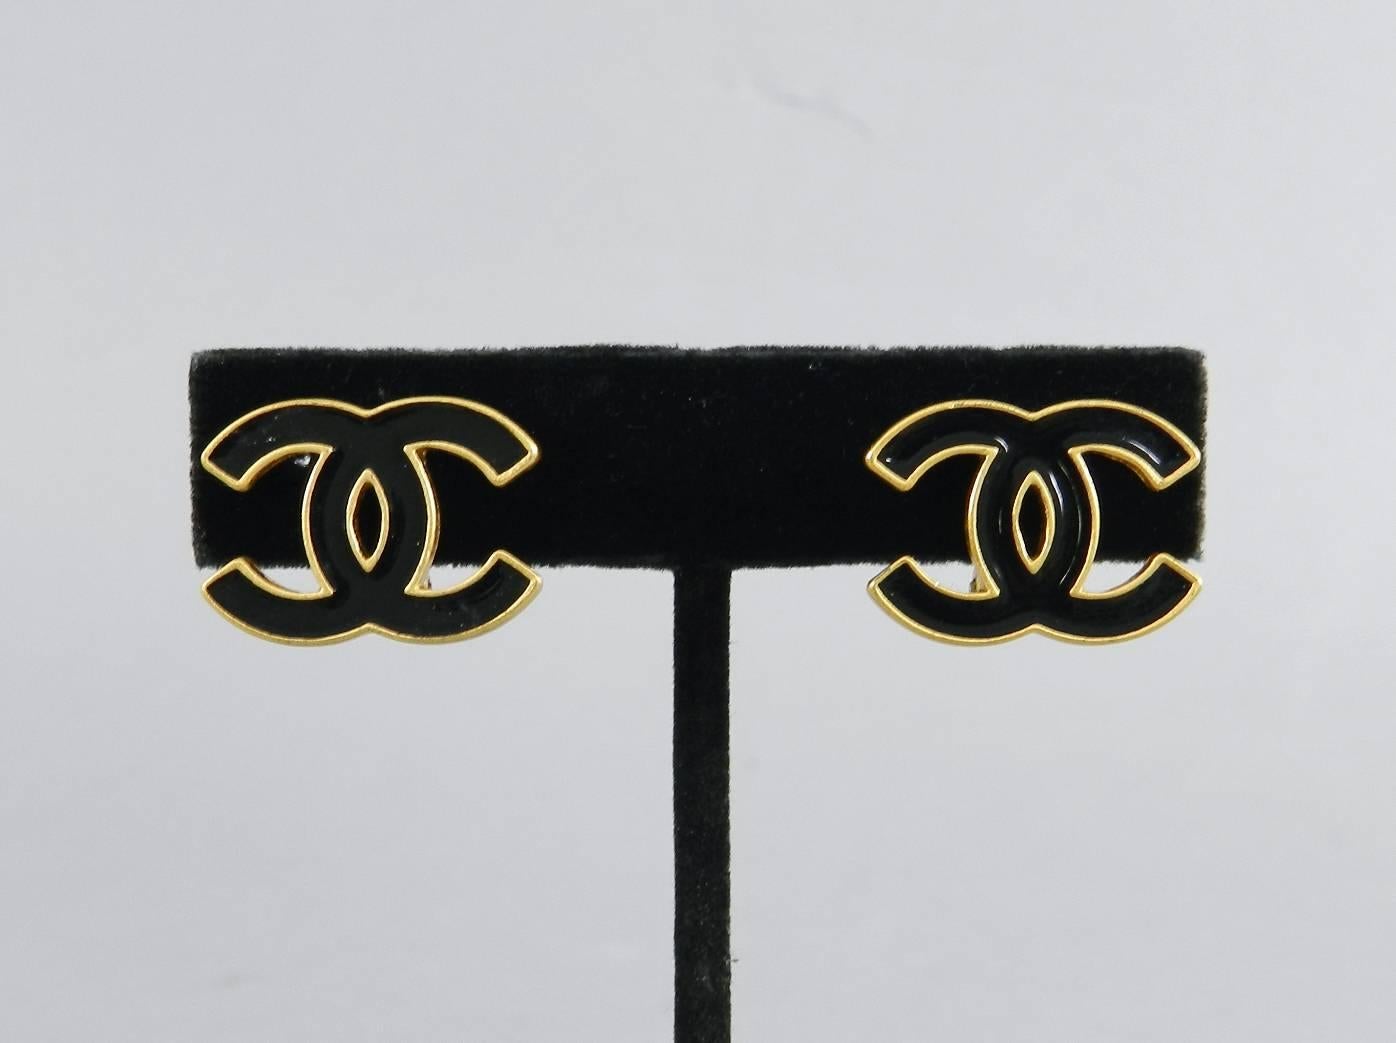 Chanel 02A CC logo clip on earrings. Matte brushed goldtone metal with black enamel.  Excellent pre-owned.  Measures about 0.75" x 5/8".

We ship worldwide.